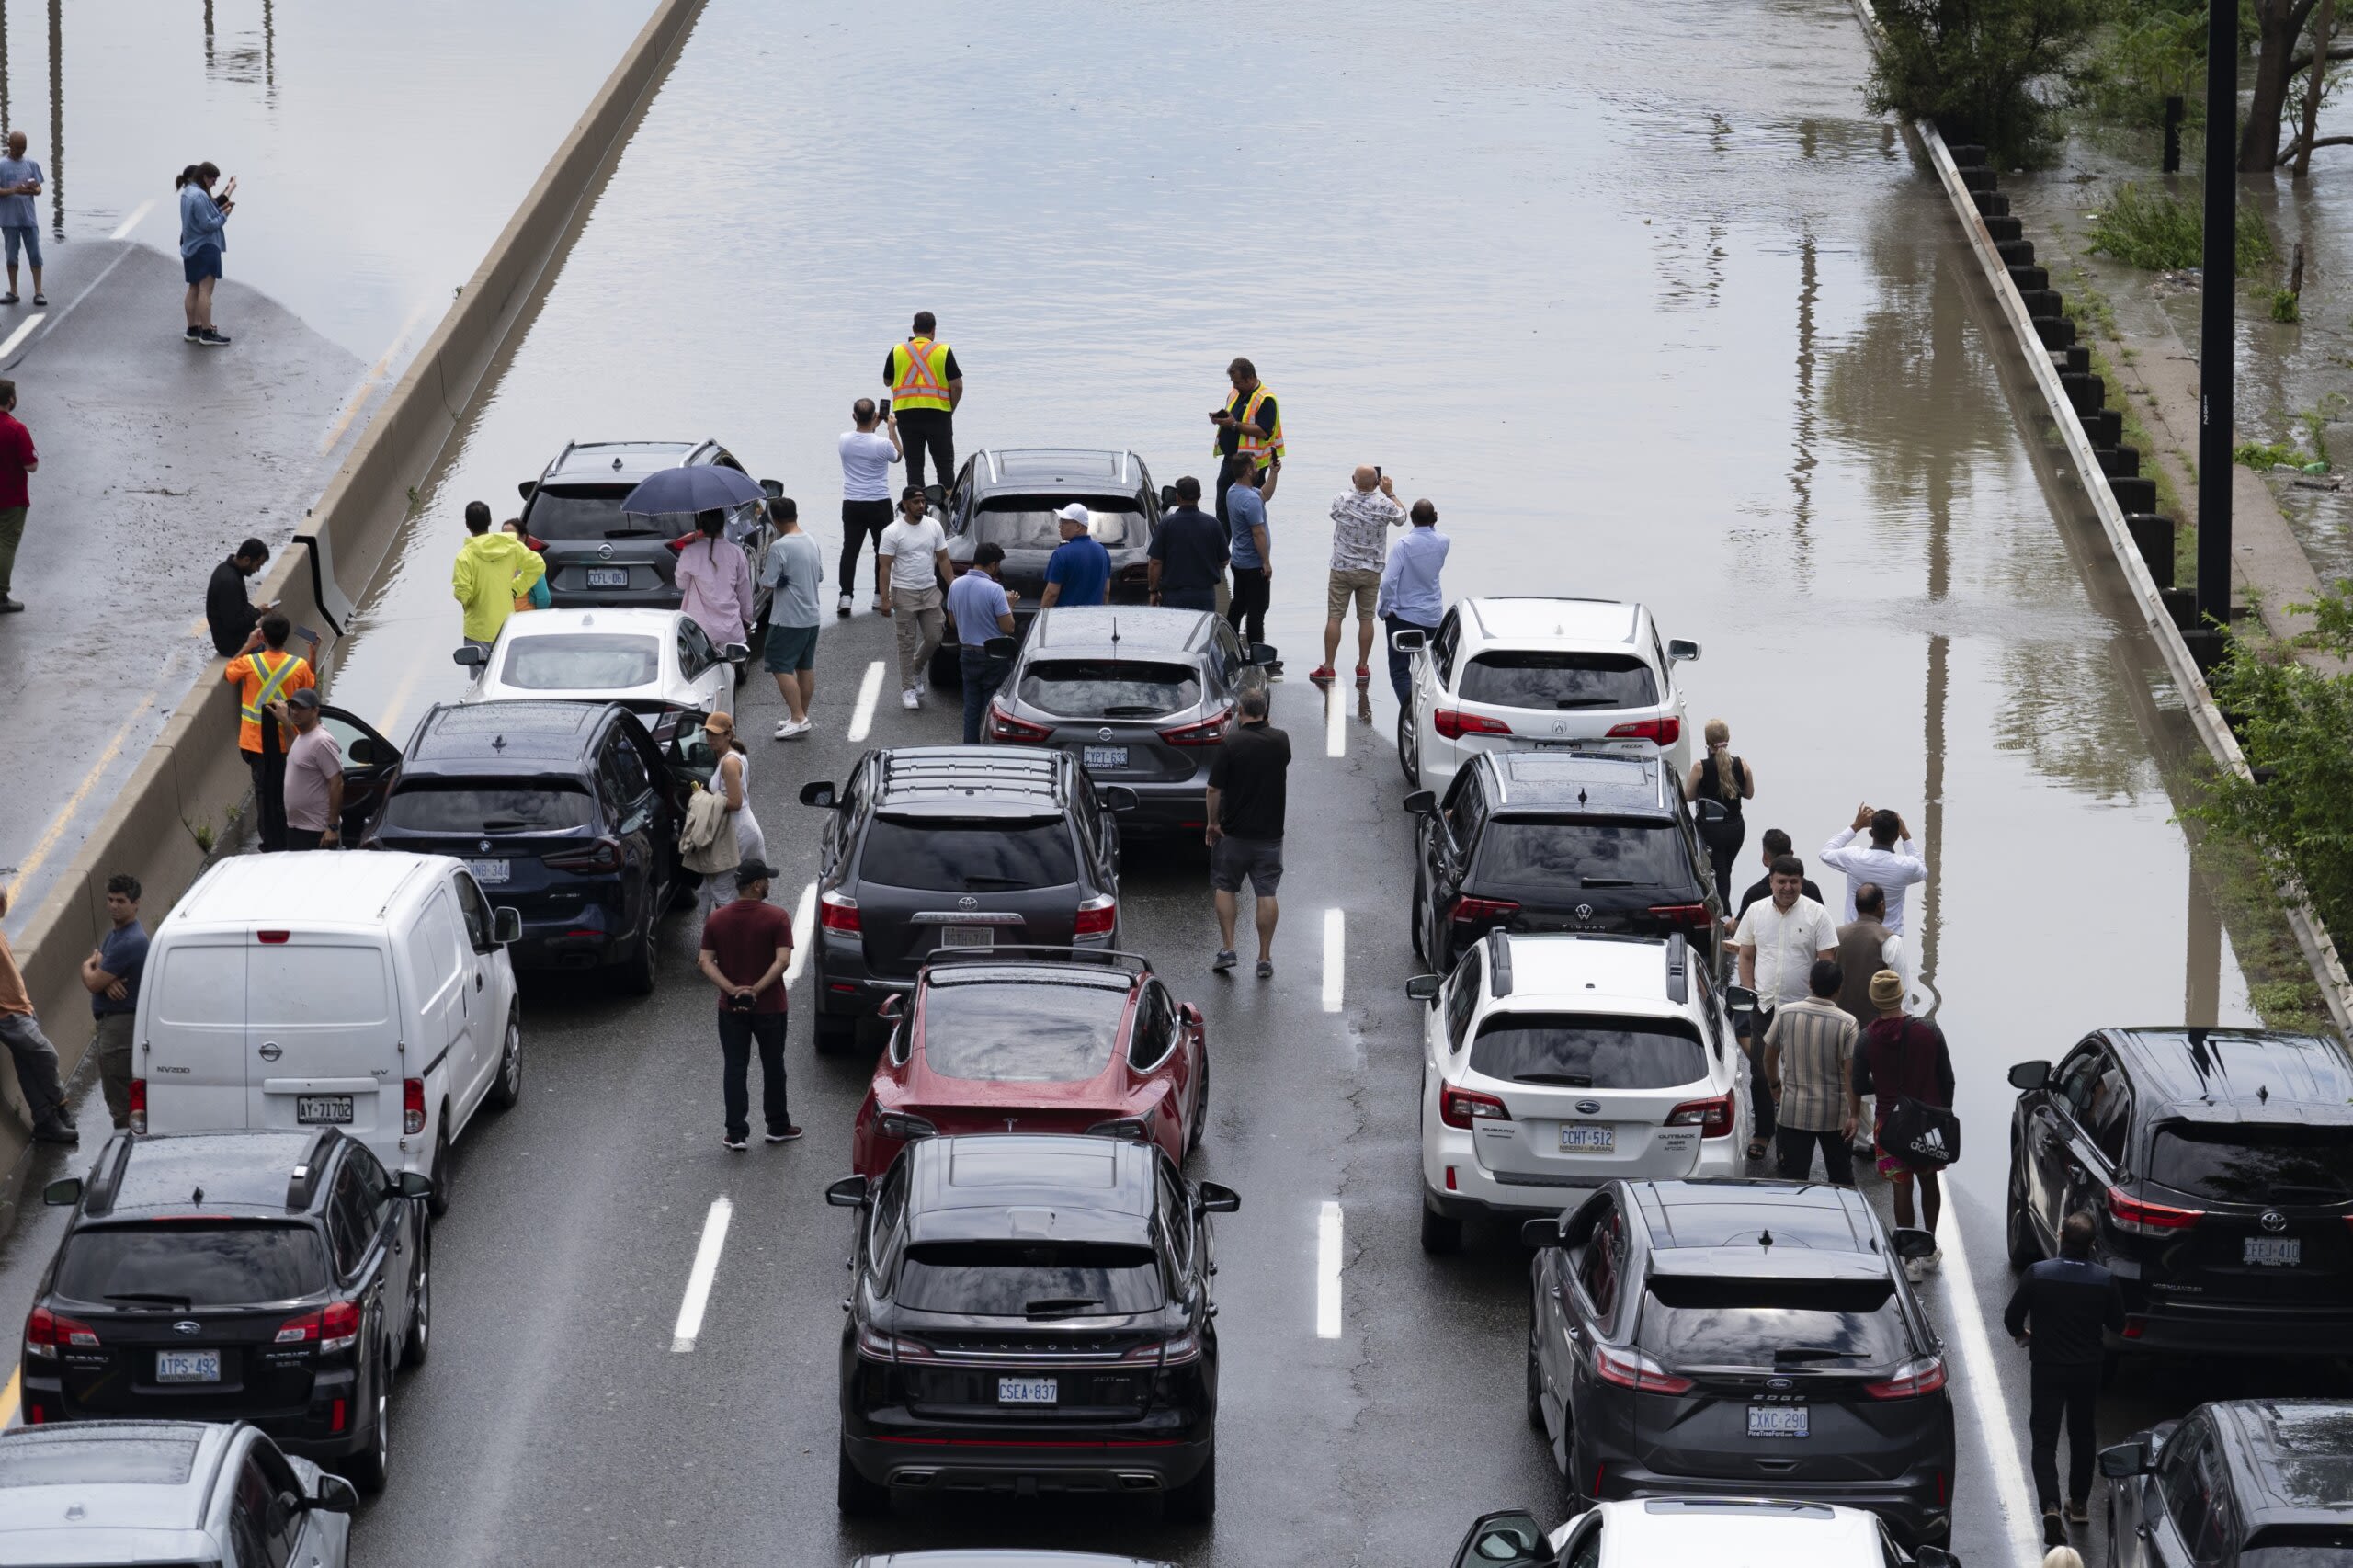 Flooding on highway in Toronto as torrential rain hits city - WTOP News